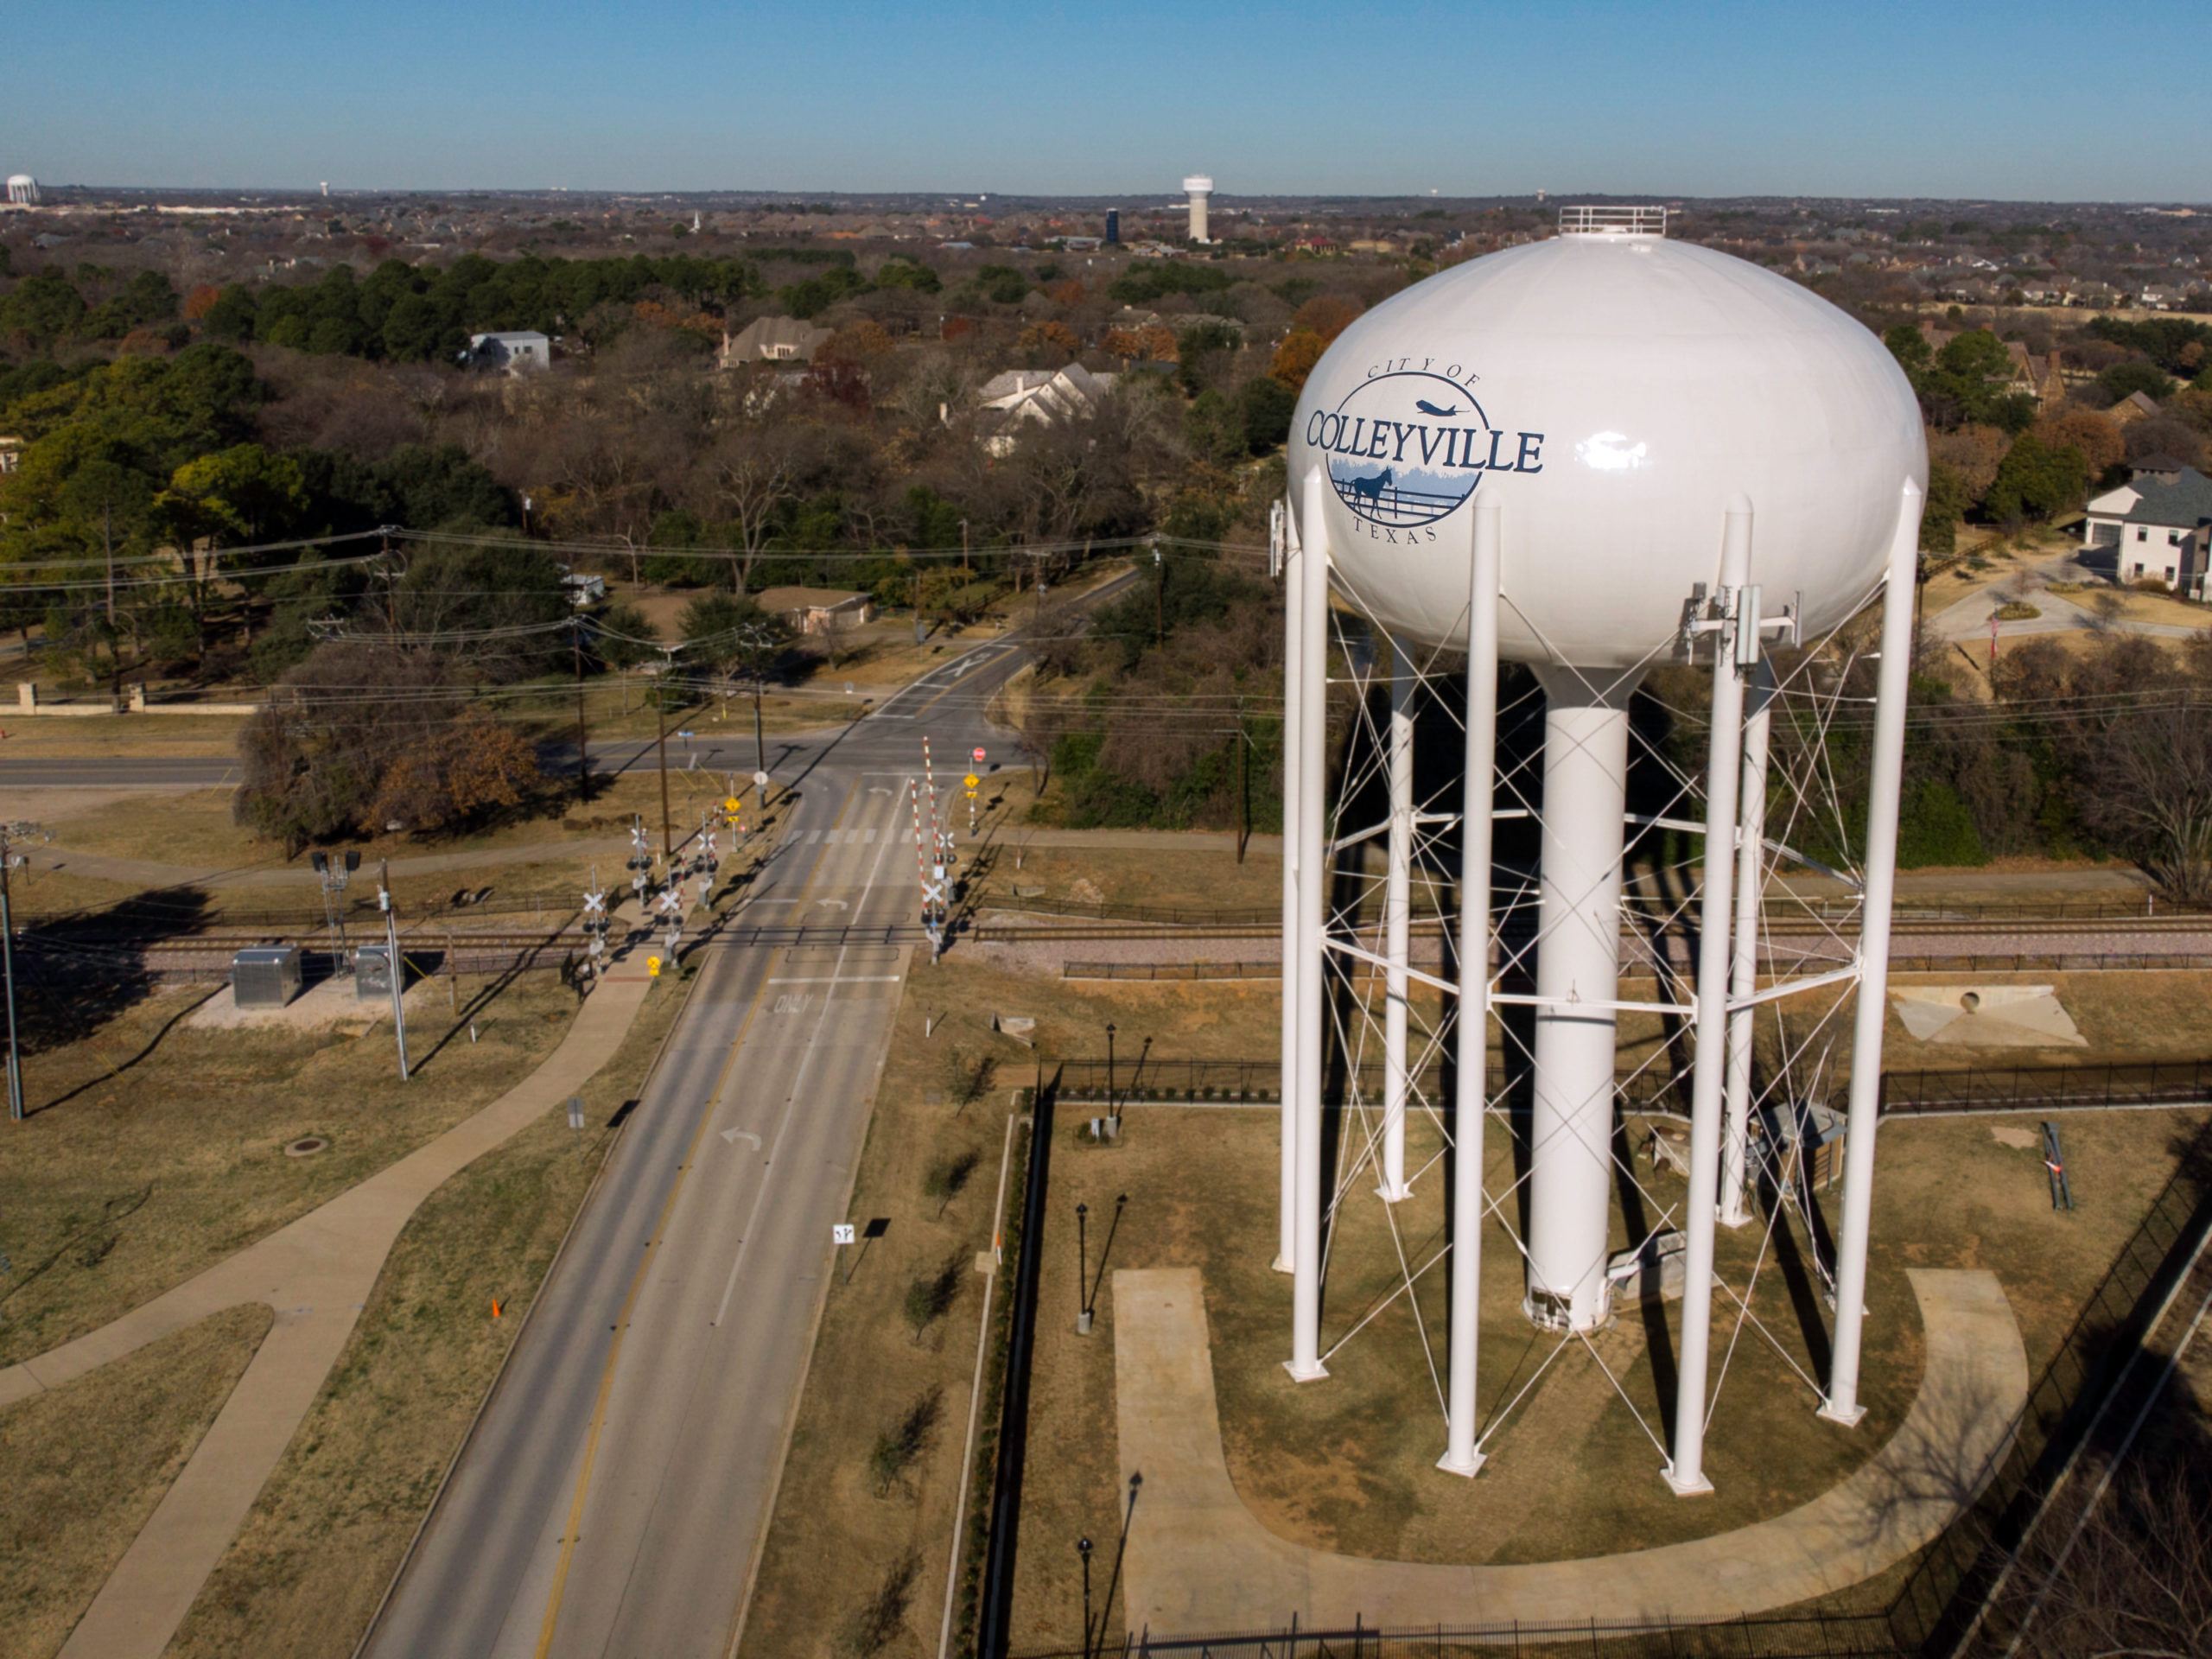 A photo of the Colleyville, Texas water tower, where Bobby Lindamood is now mayor, shot with a shifted focus filter effect to make everything look smaller or toylike.